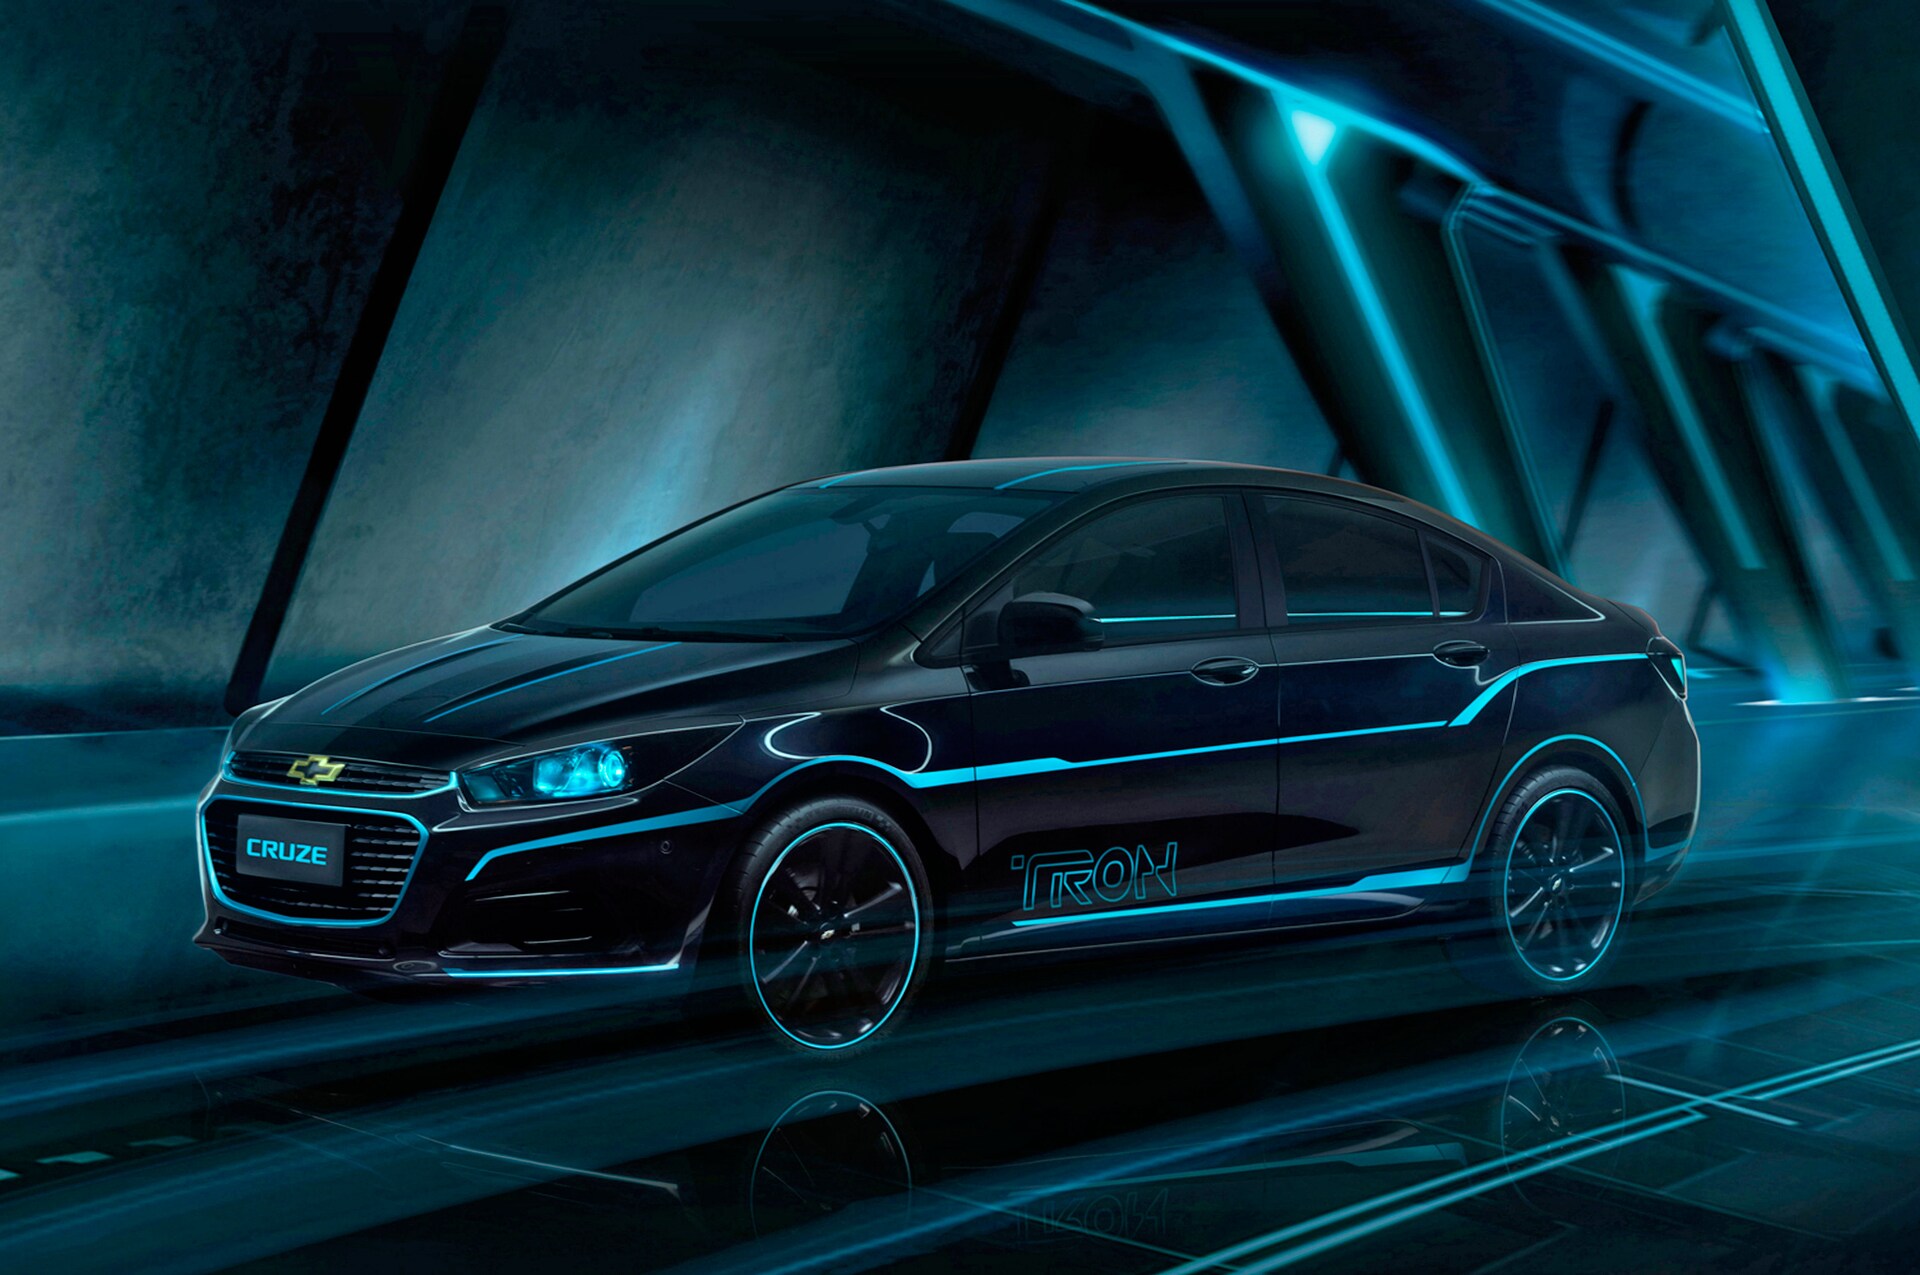 Chevrolet Cruze Gets Reimagined for the World of TRON in Beijing